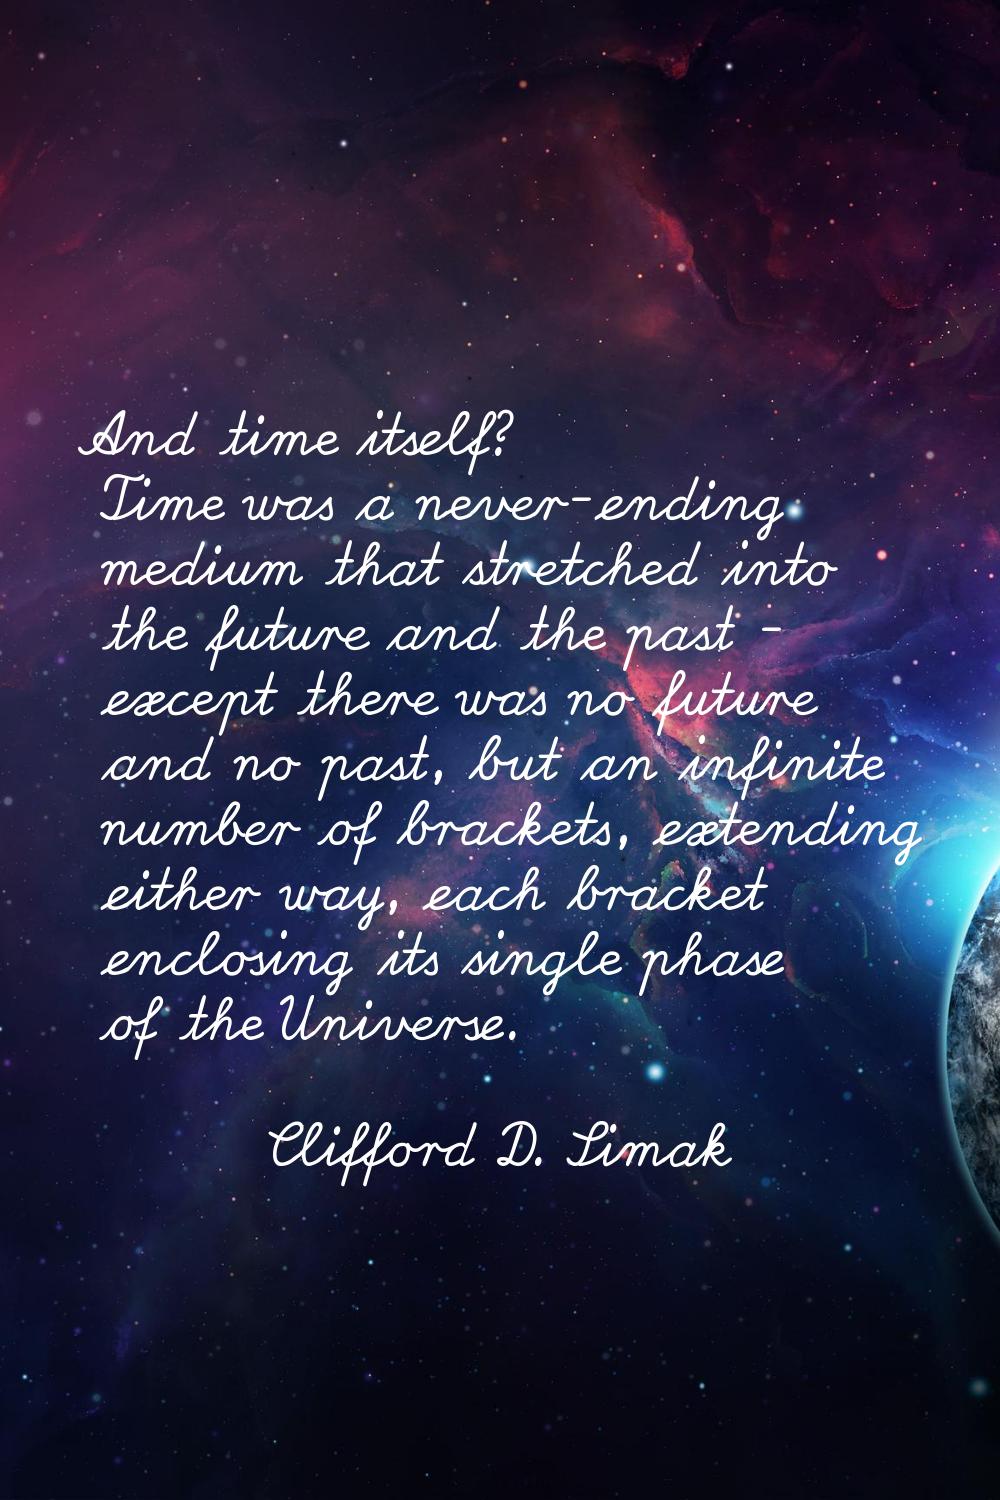 And time itself? Time was a never-ending medium that stretched into the future and the past - excep